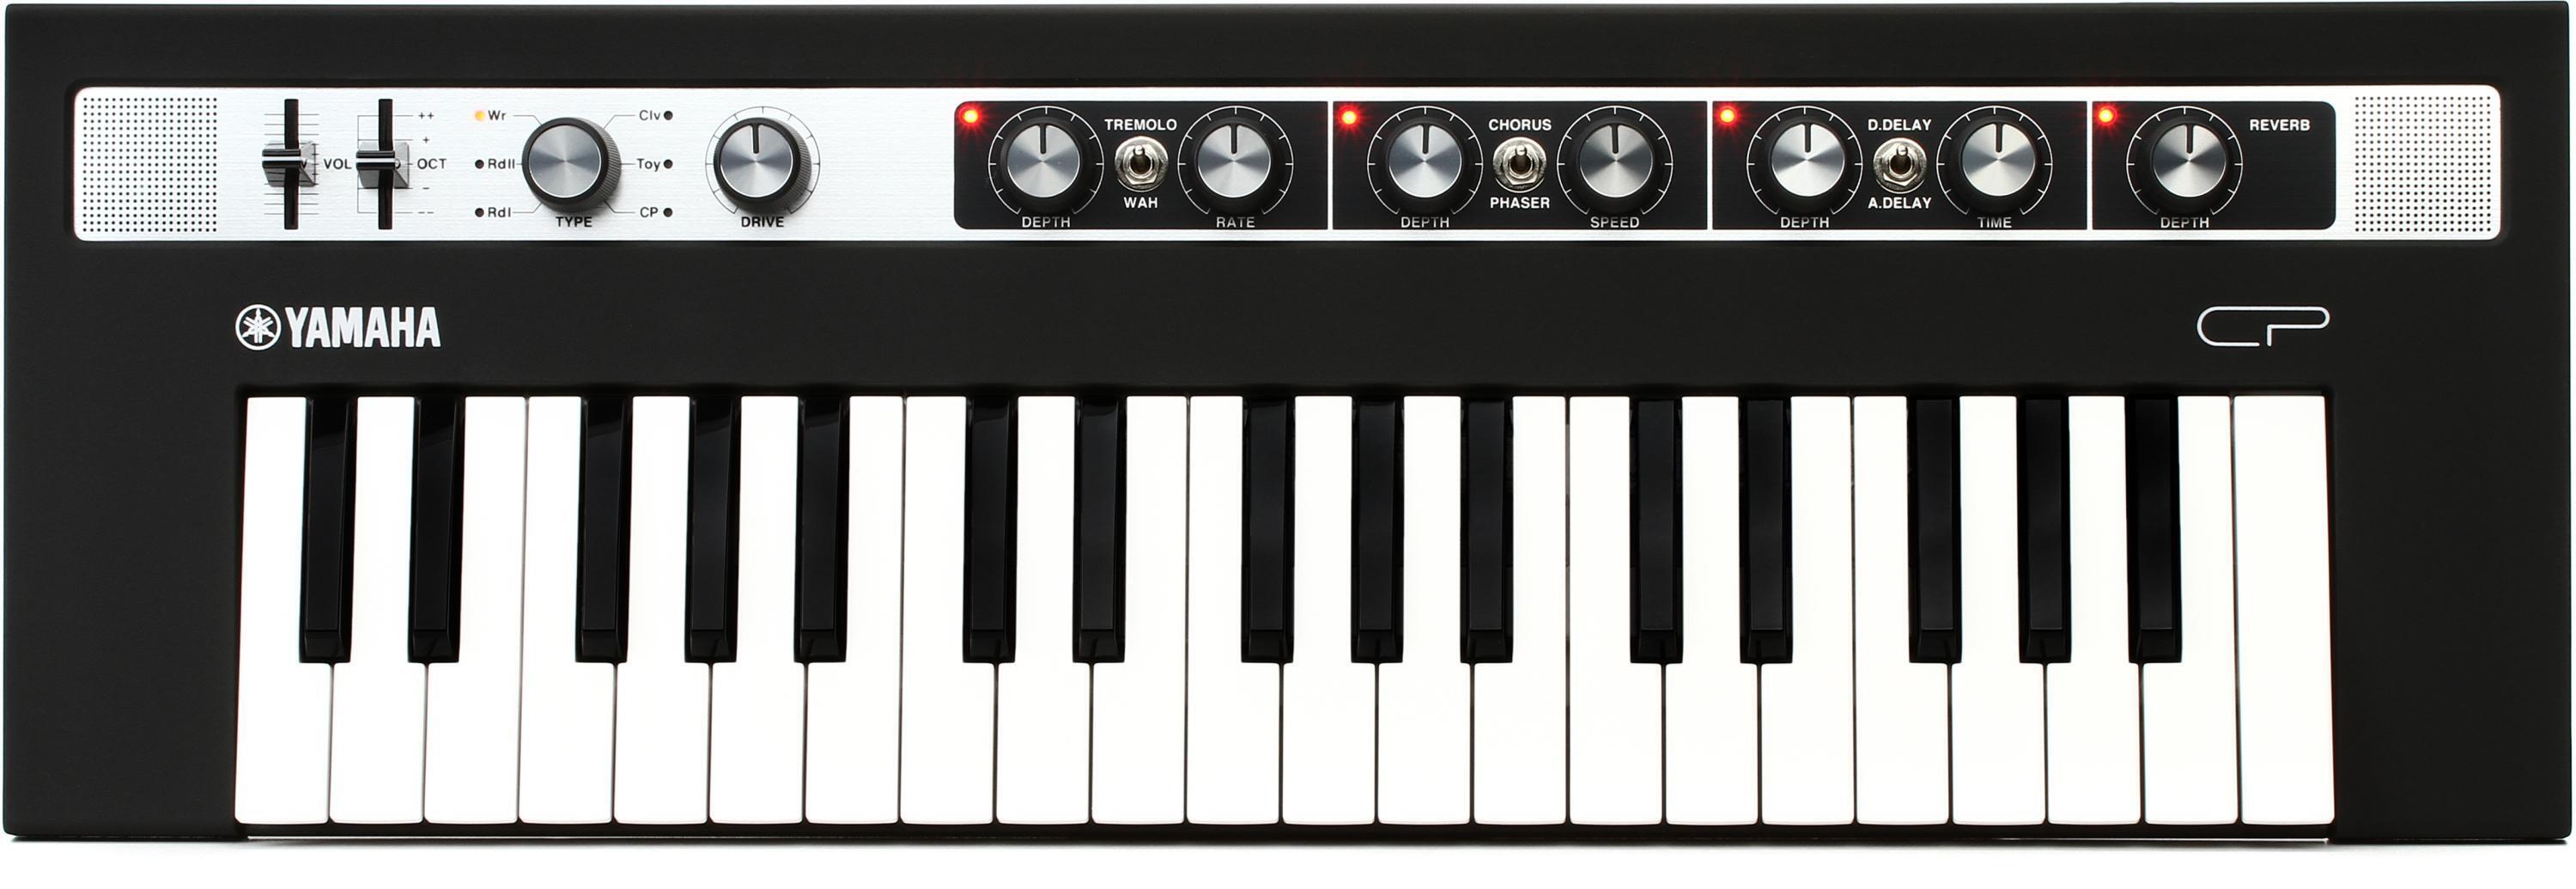 Yamaha Reface CP Electric Piano Synthesizer | Sweetwater